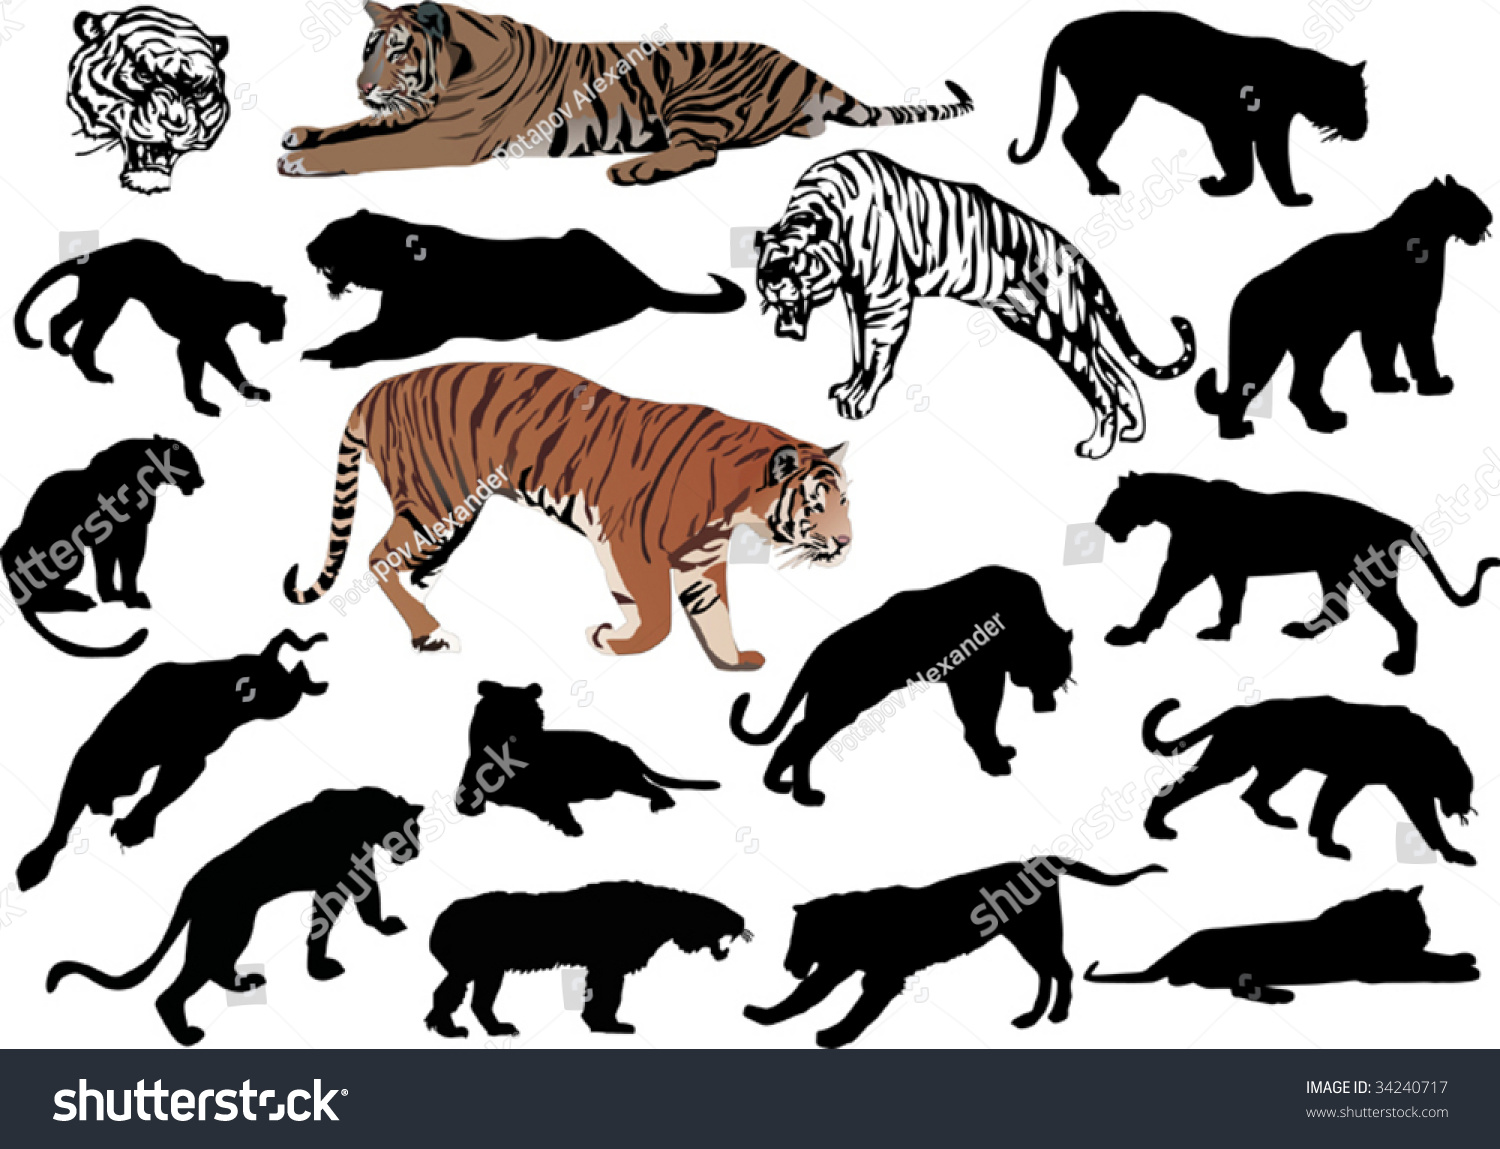 Illustration Tiger Silhouettes Isolated On White Stock Vector Royalty Free 34240717 